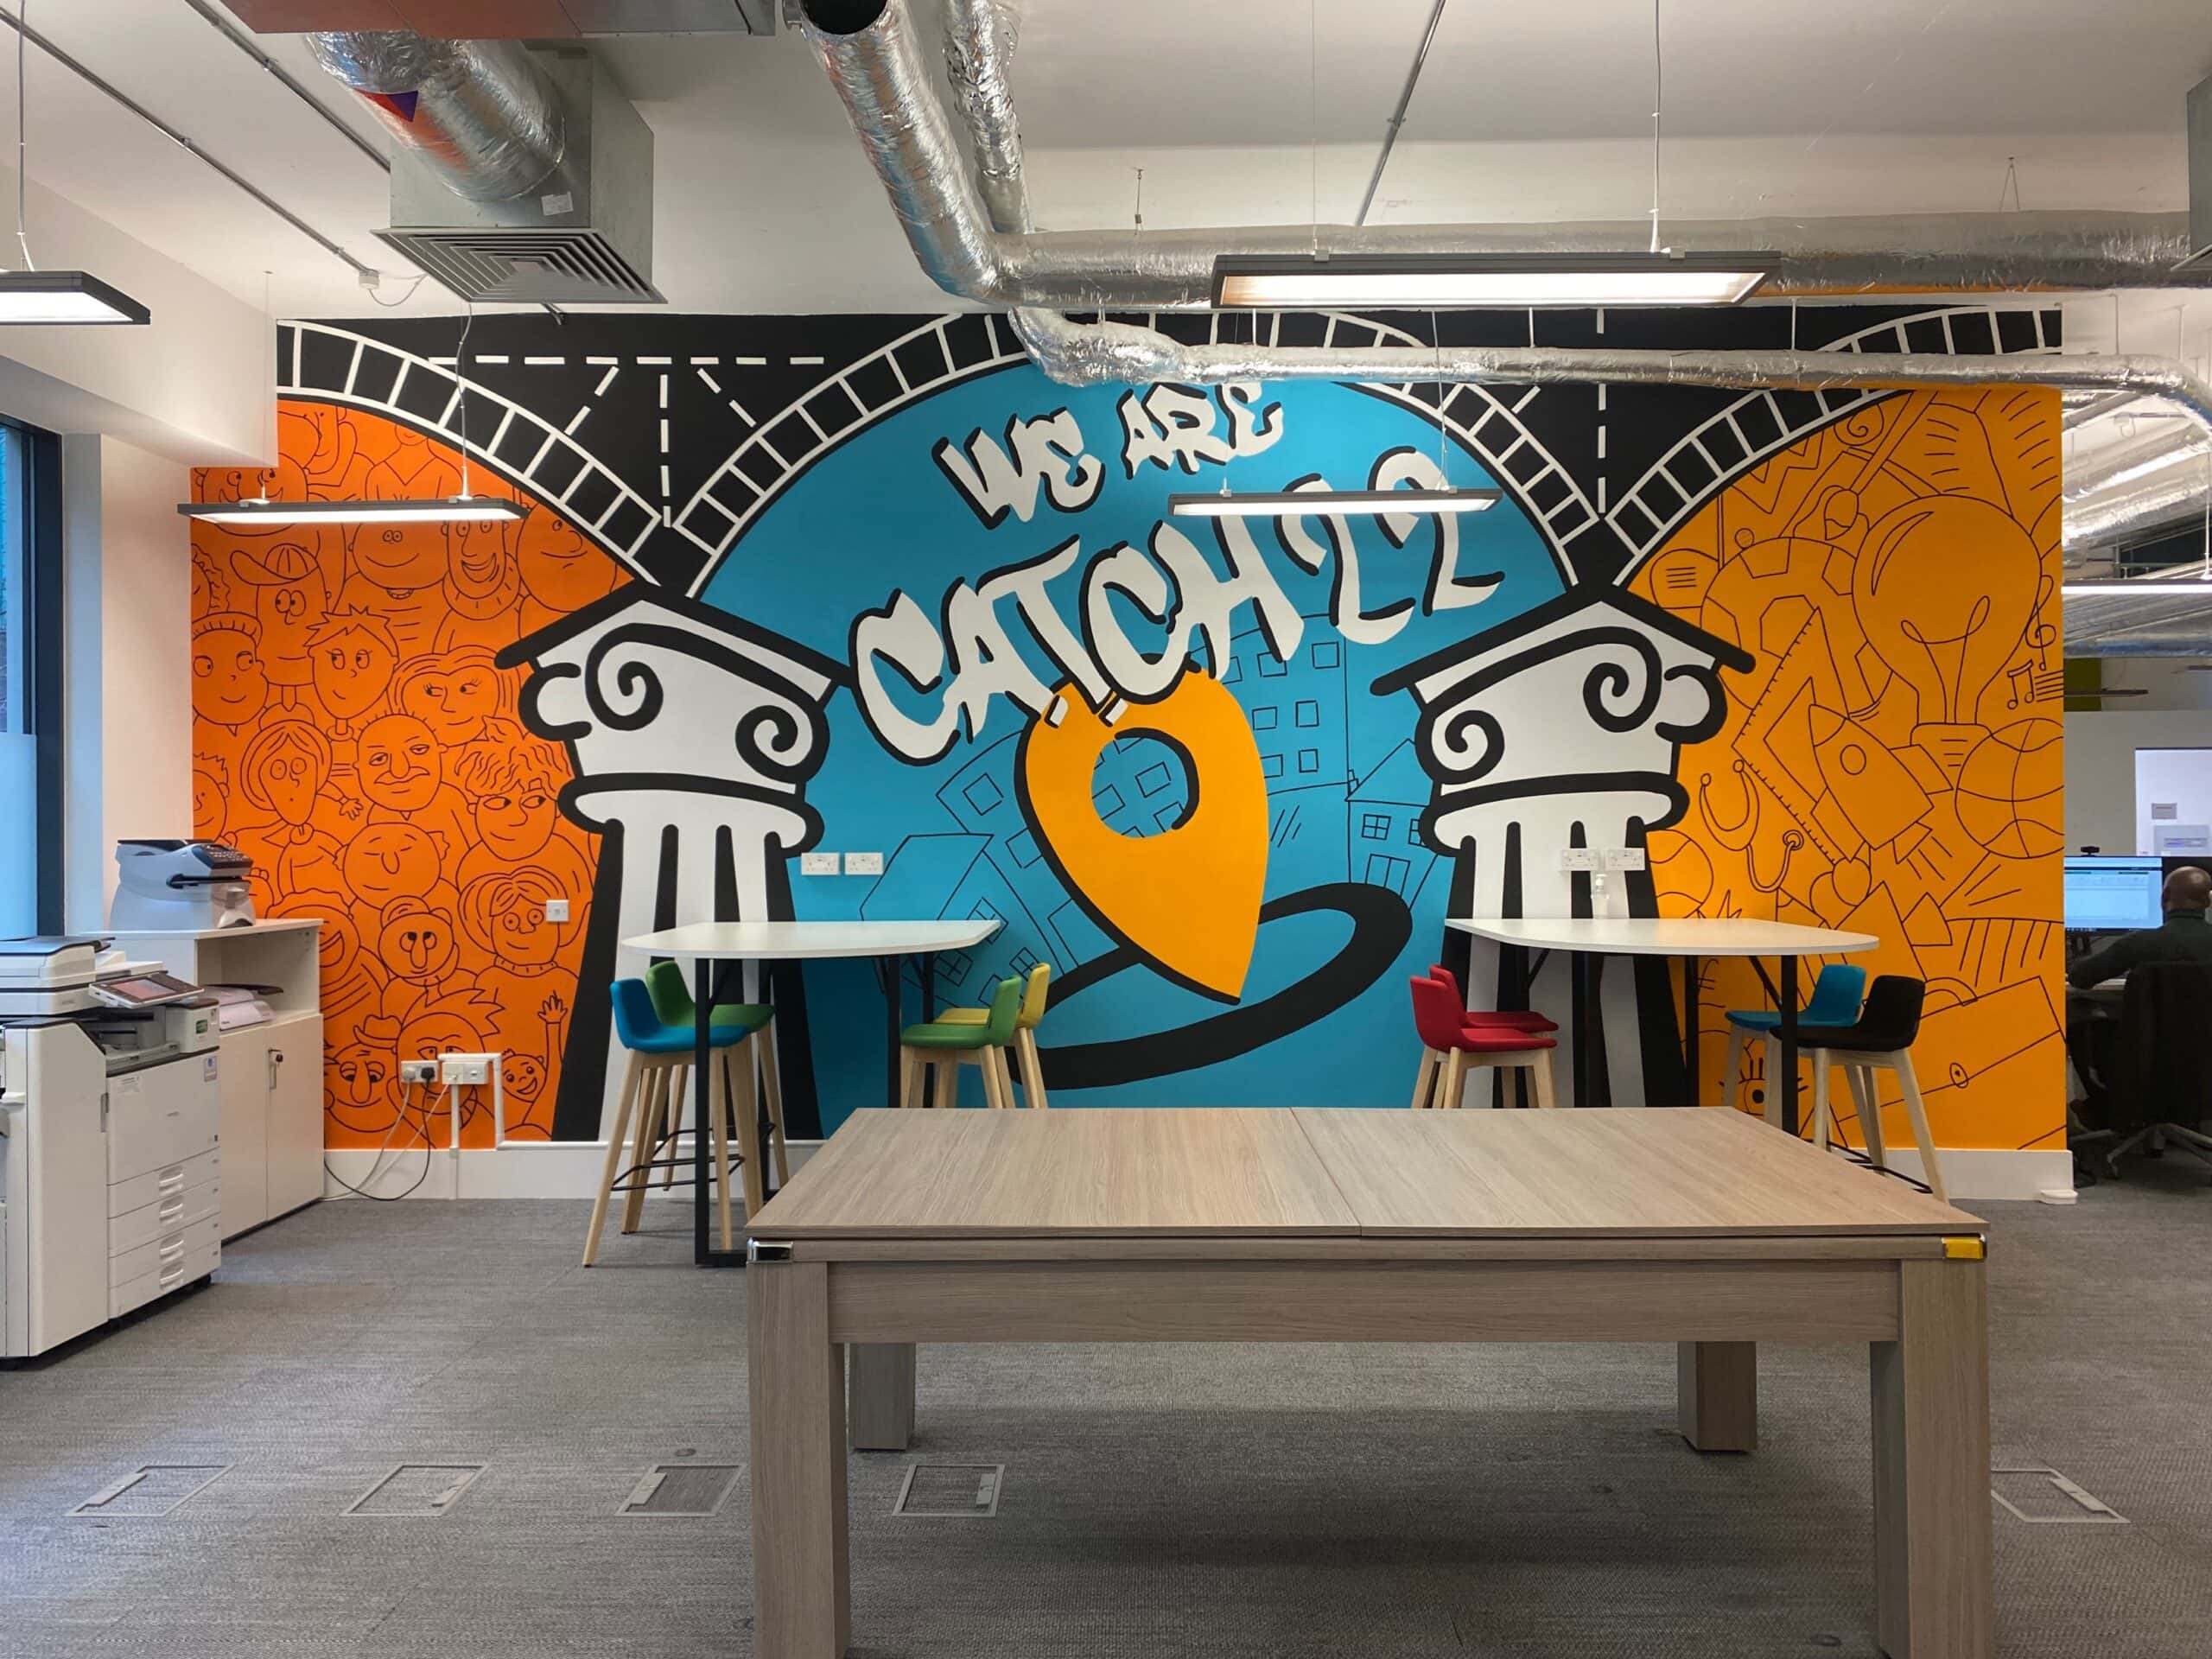 A bright coloured mural is painted on the wall of an office, which reads "We are Catch22". The mural depicts Catch22's 3Ps - people, place and purpose. In front of the mural, you can see office equipment including printers, desks and chairs, and a pool table.